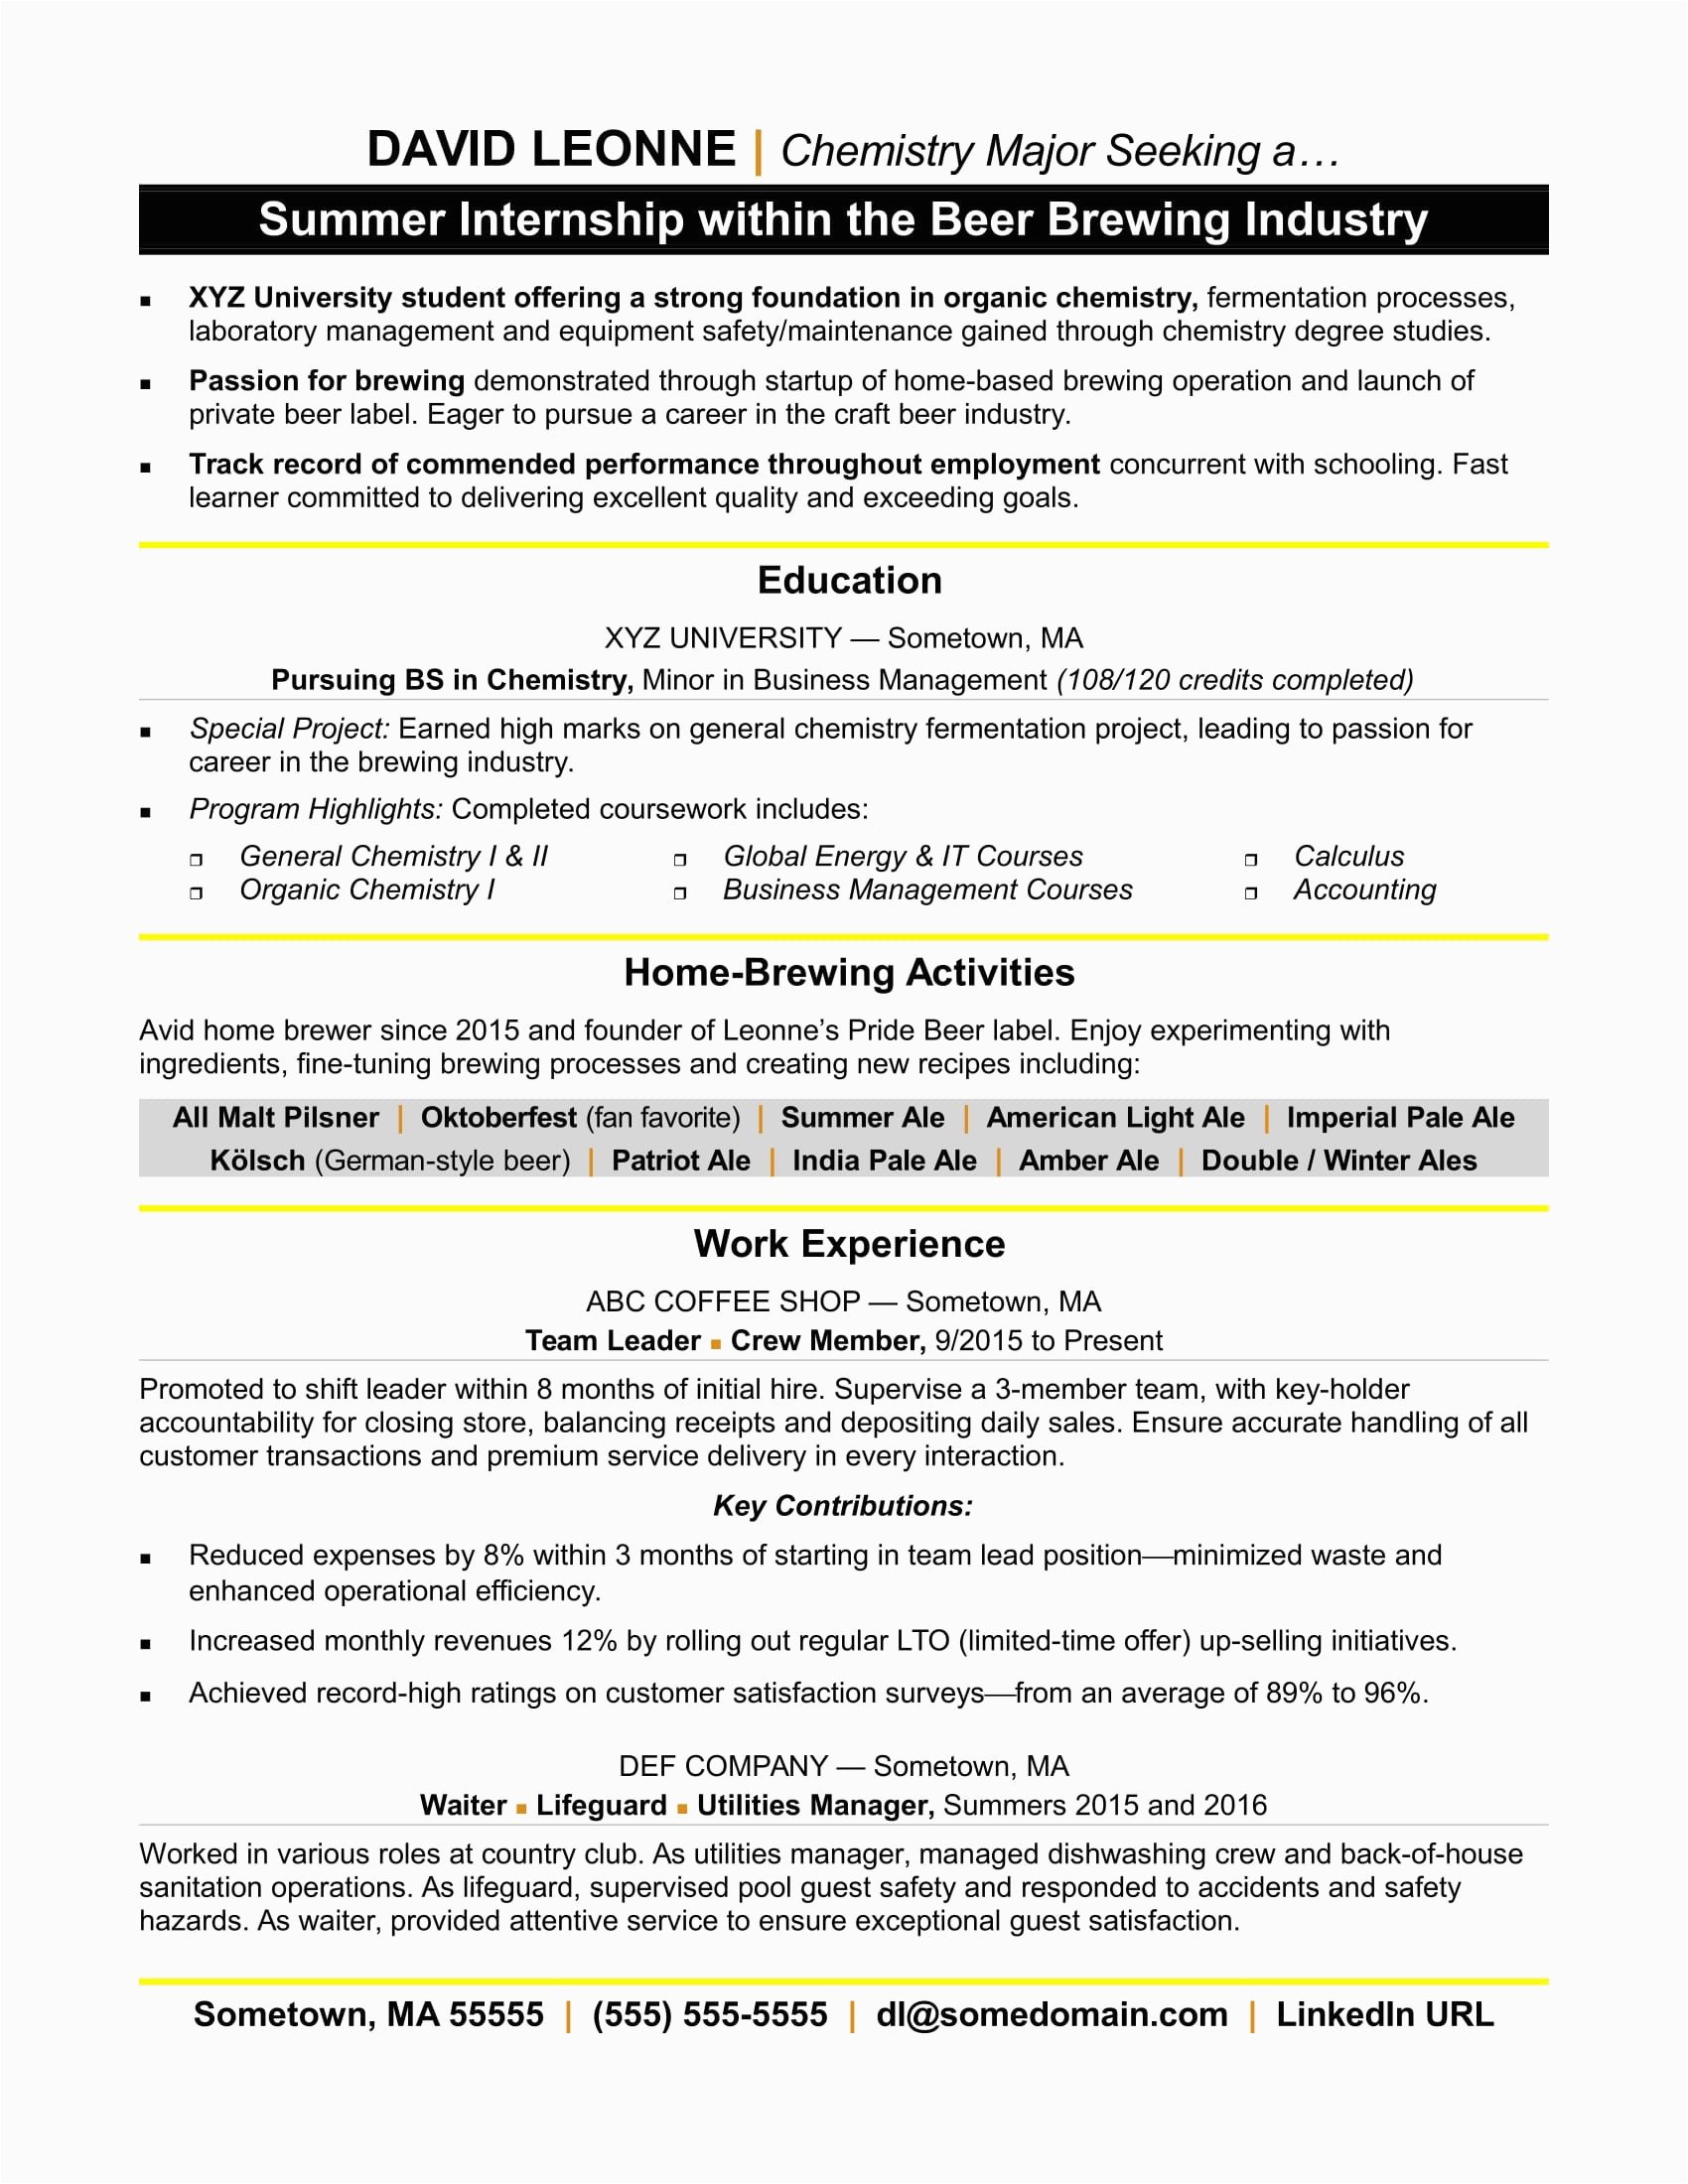 Sample Resume for College Student for Internship Resume for Internship